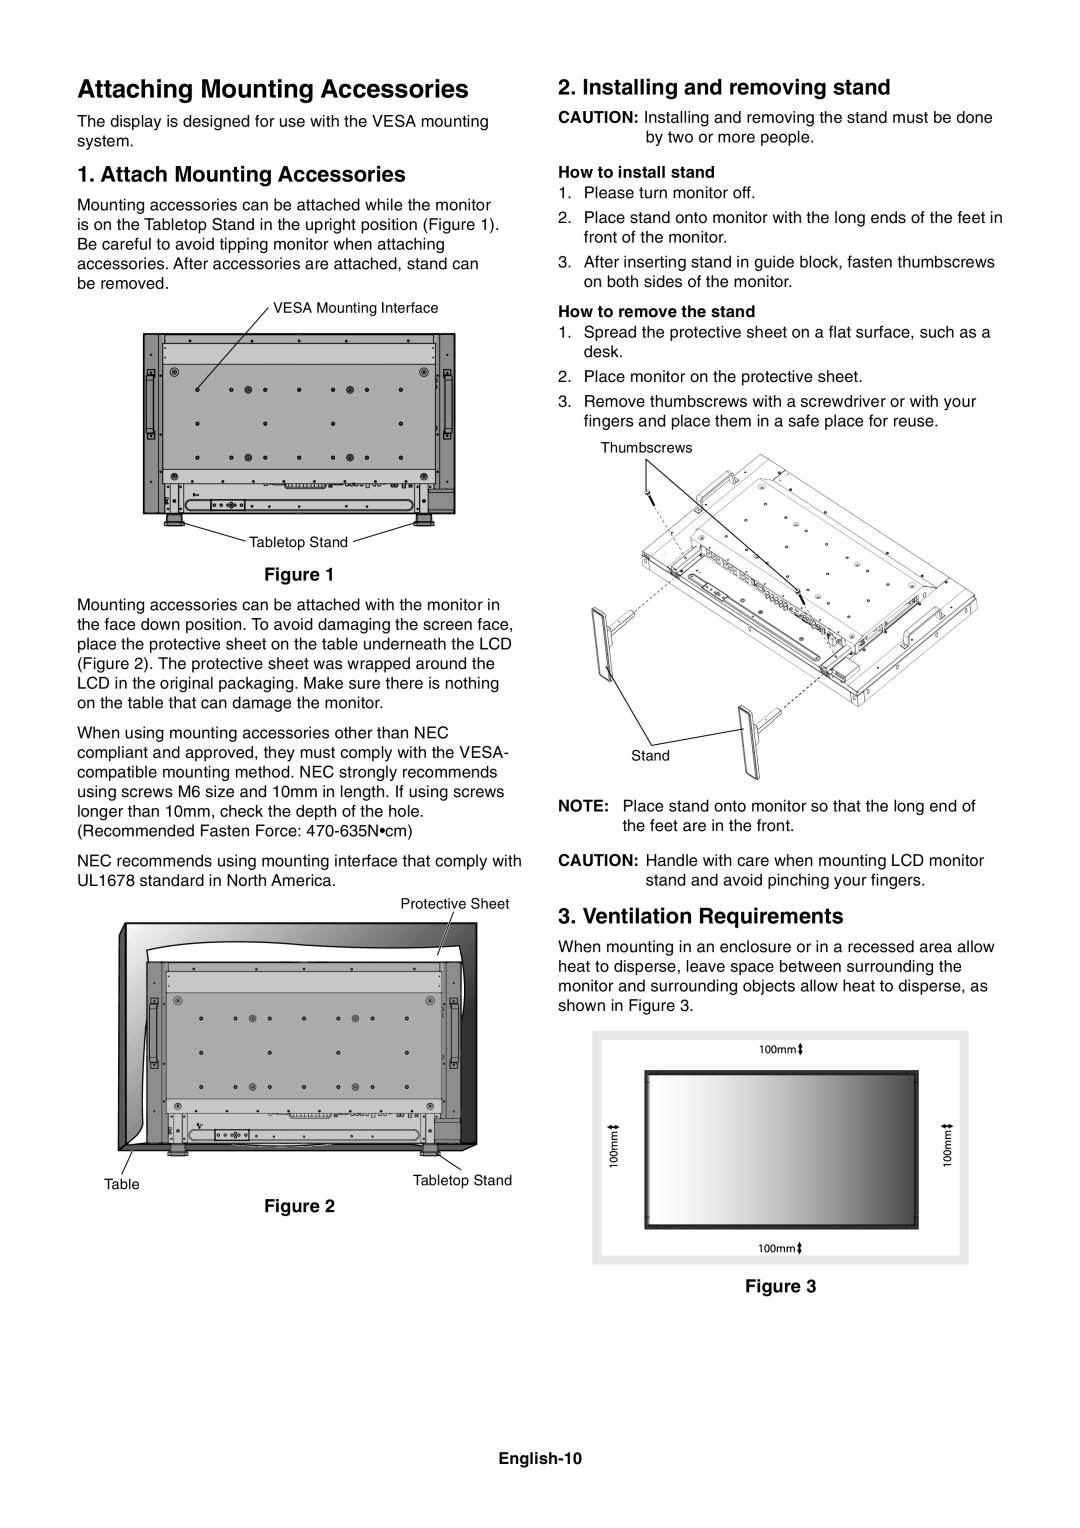 NEC LCD4020, LCD4620 Attaching Mounting Accessories, Attach Mounting Accessories, Installing and removing stand, Figure 